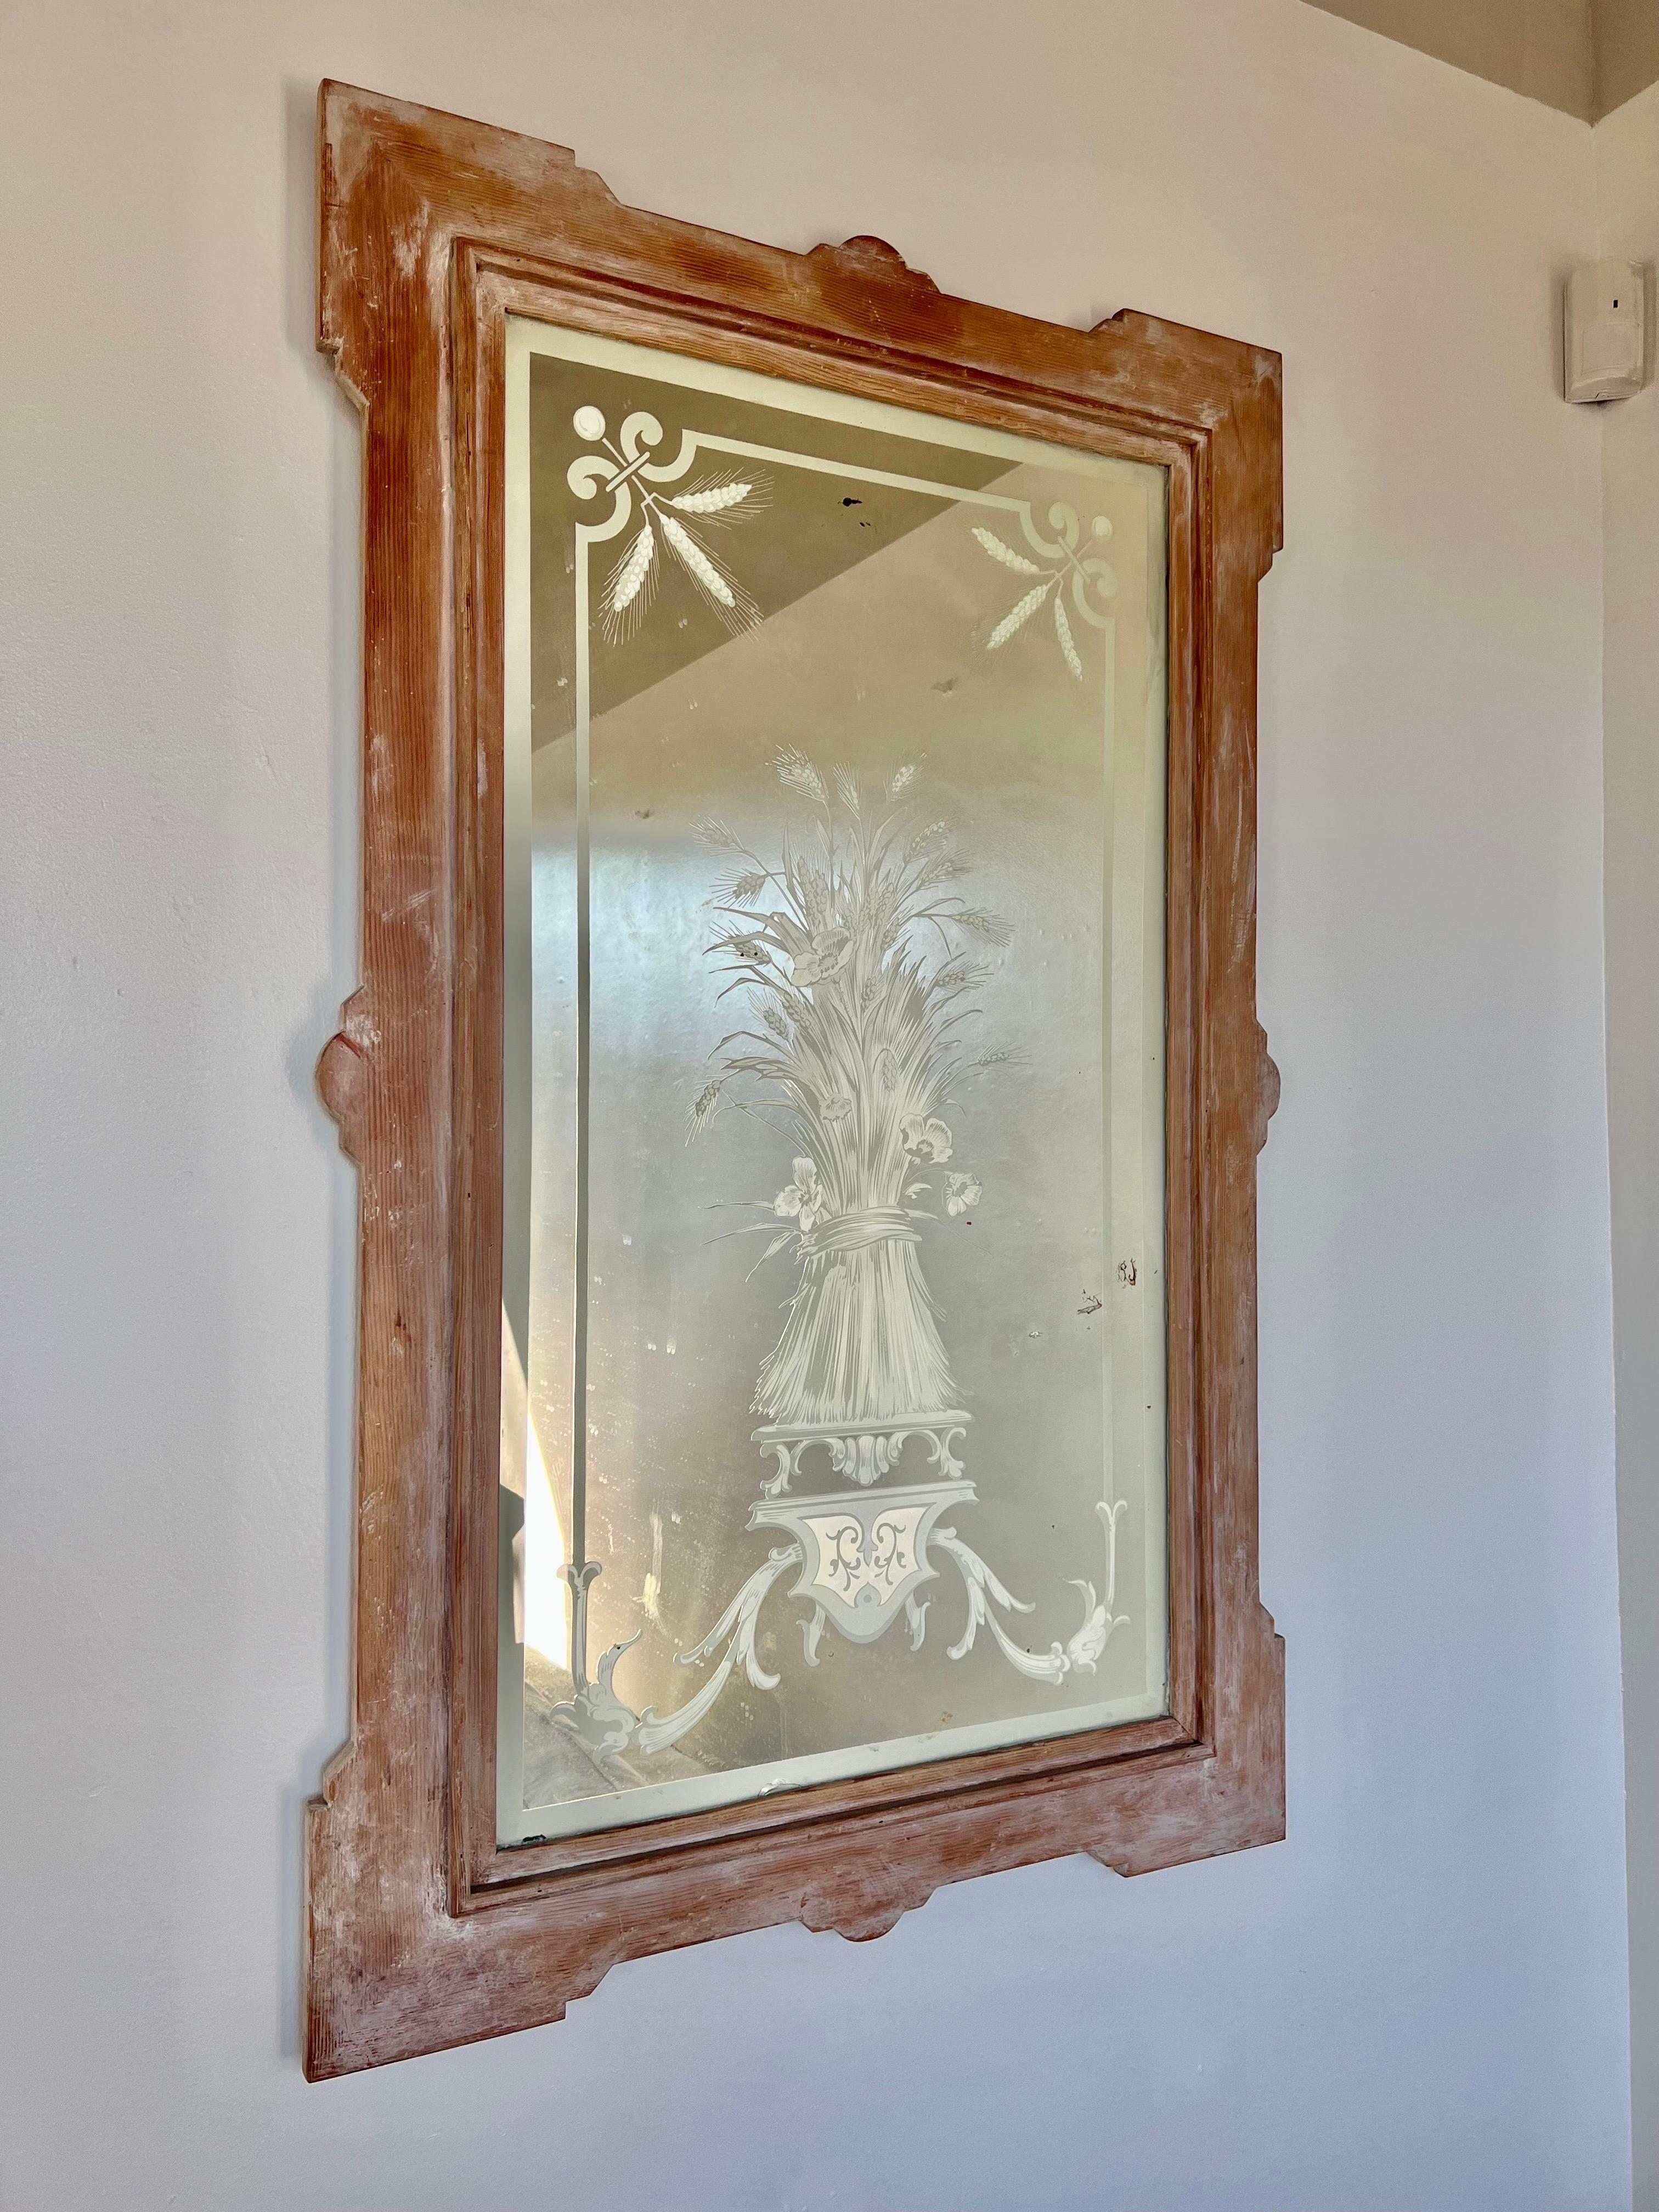 19th century French white washed wood framed mirror with beautiful etched glass depicting wheat and more.